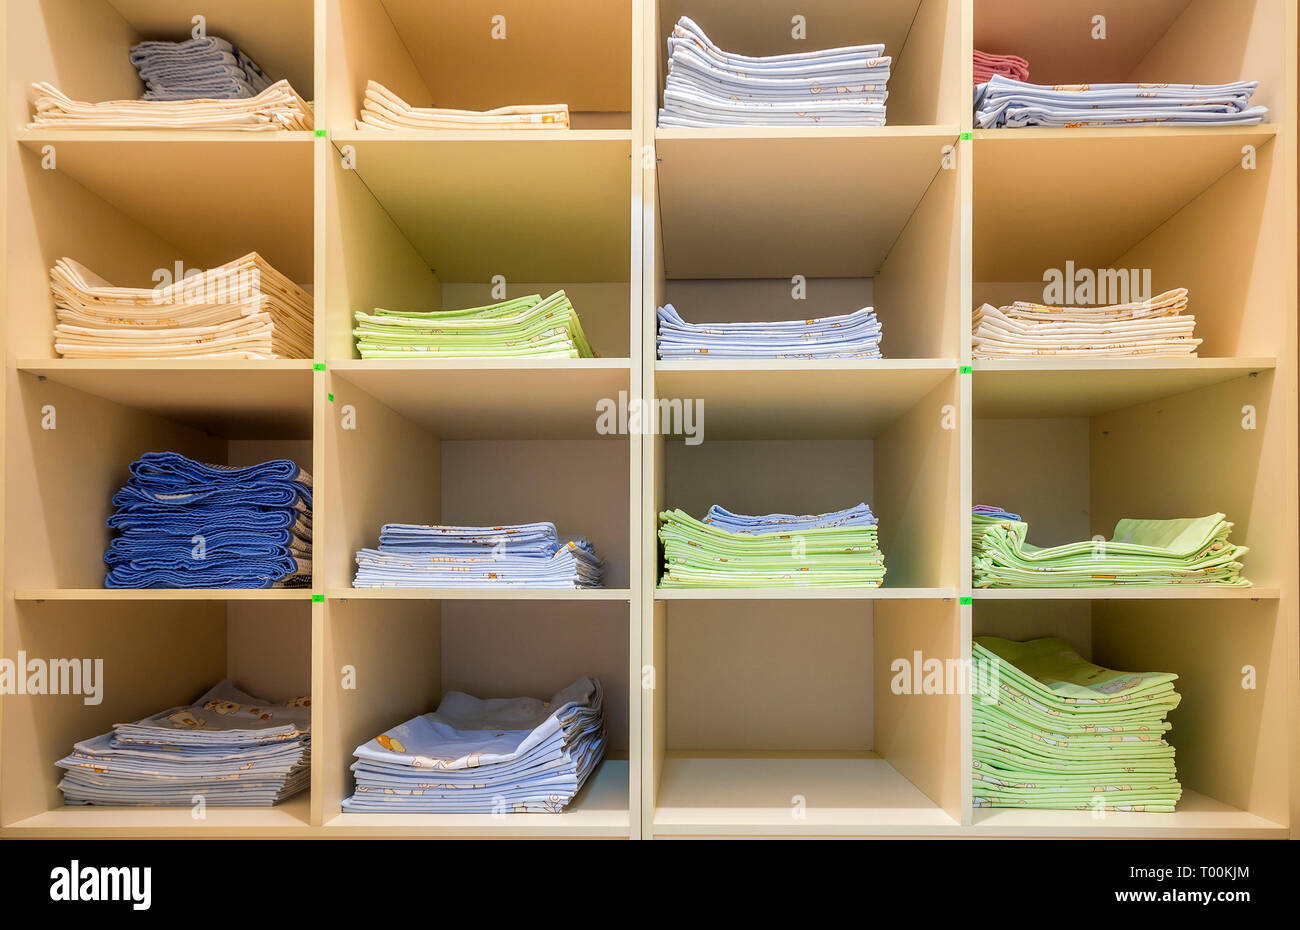 Interior of white plastic cabinet or clothing open wardrobe with stacked piles of clean colorful linen on shelves. Furniture design, hotel, hospital o Stock Photo